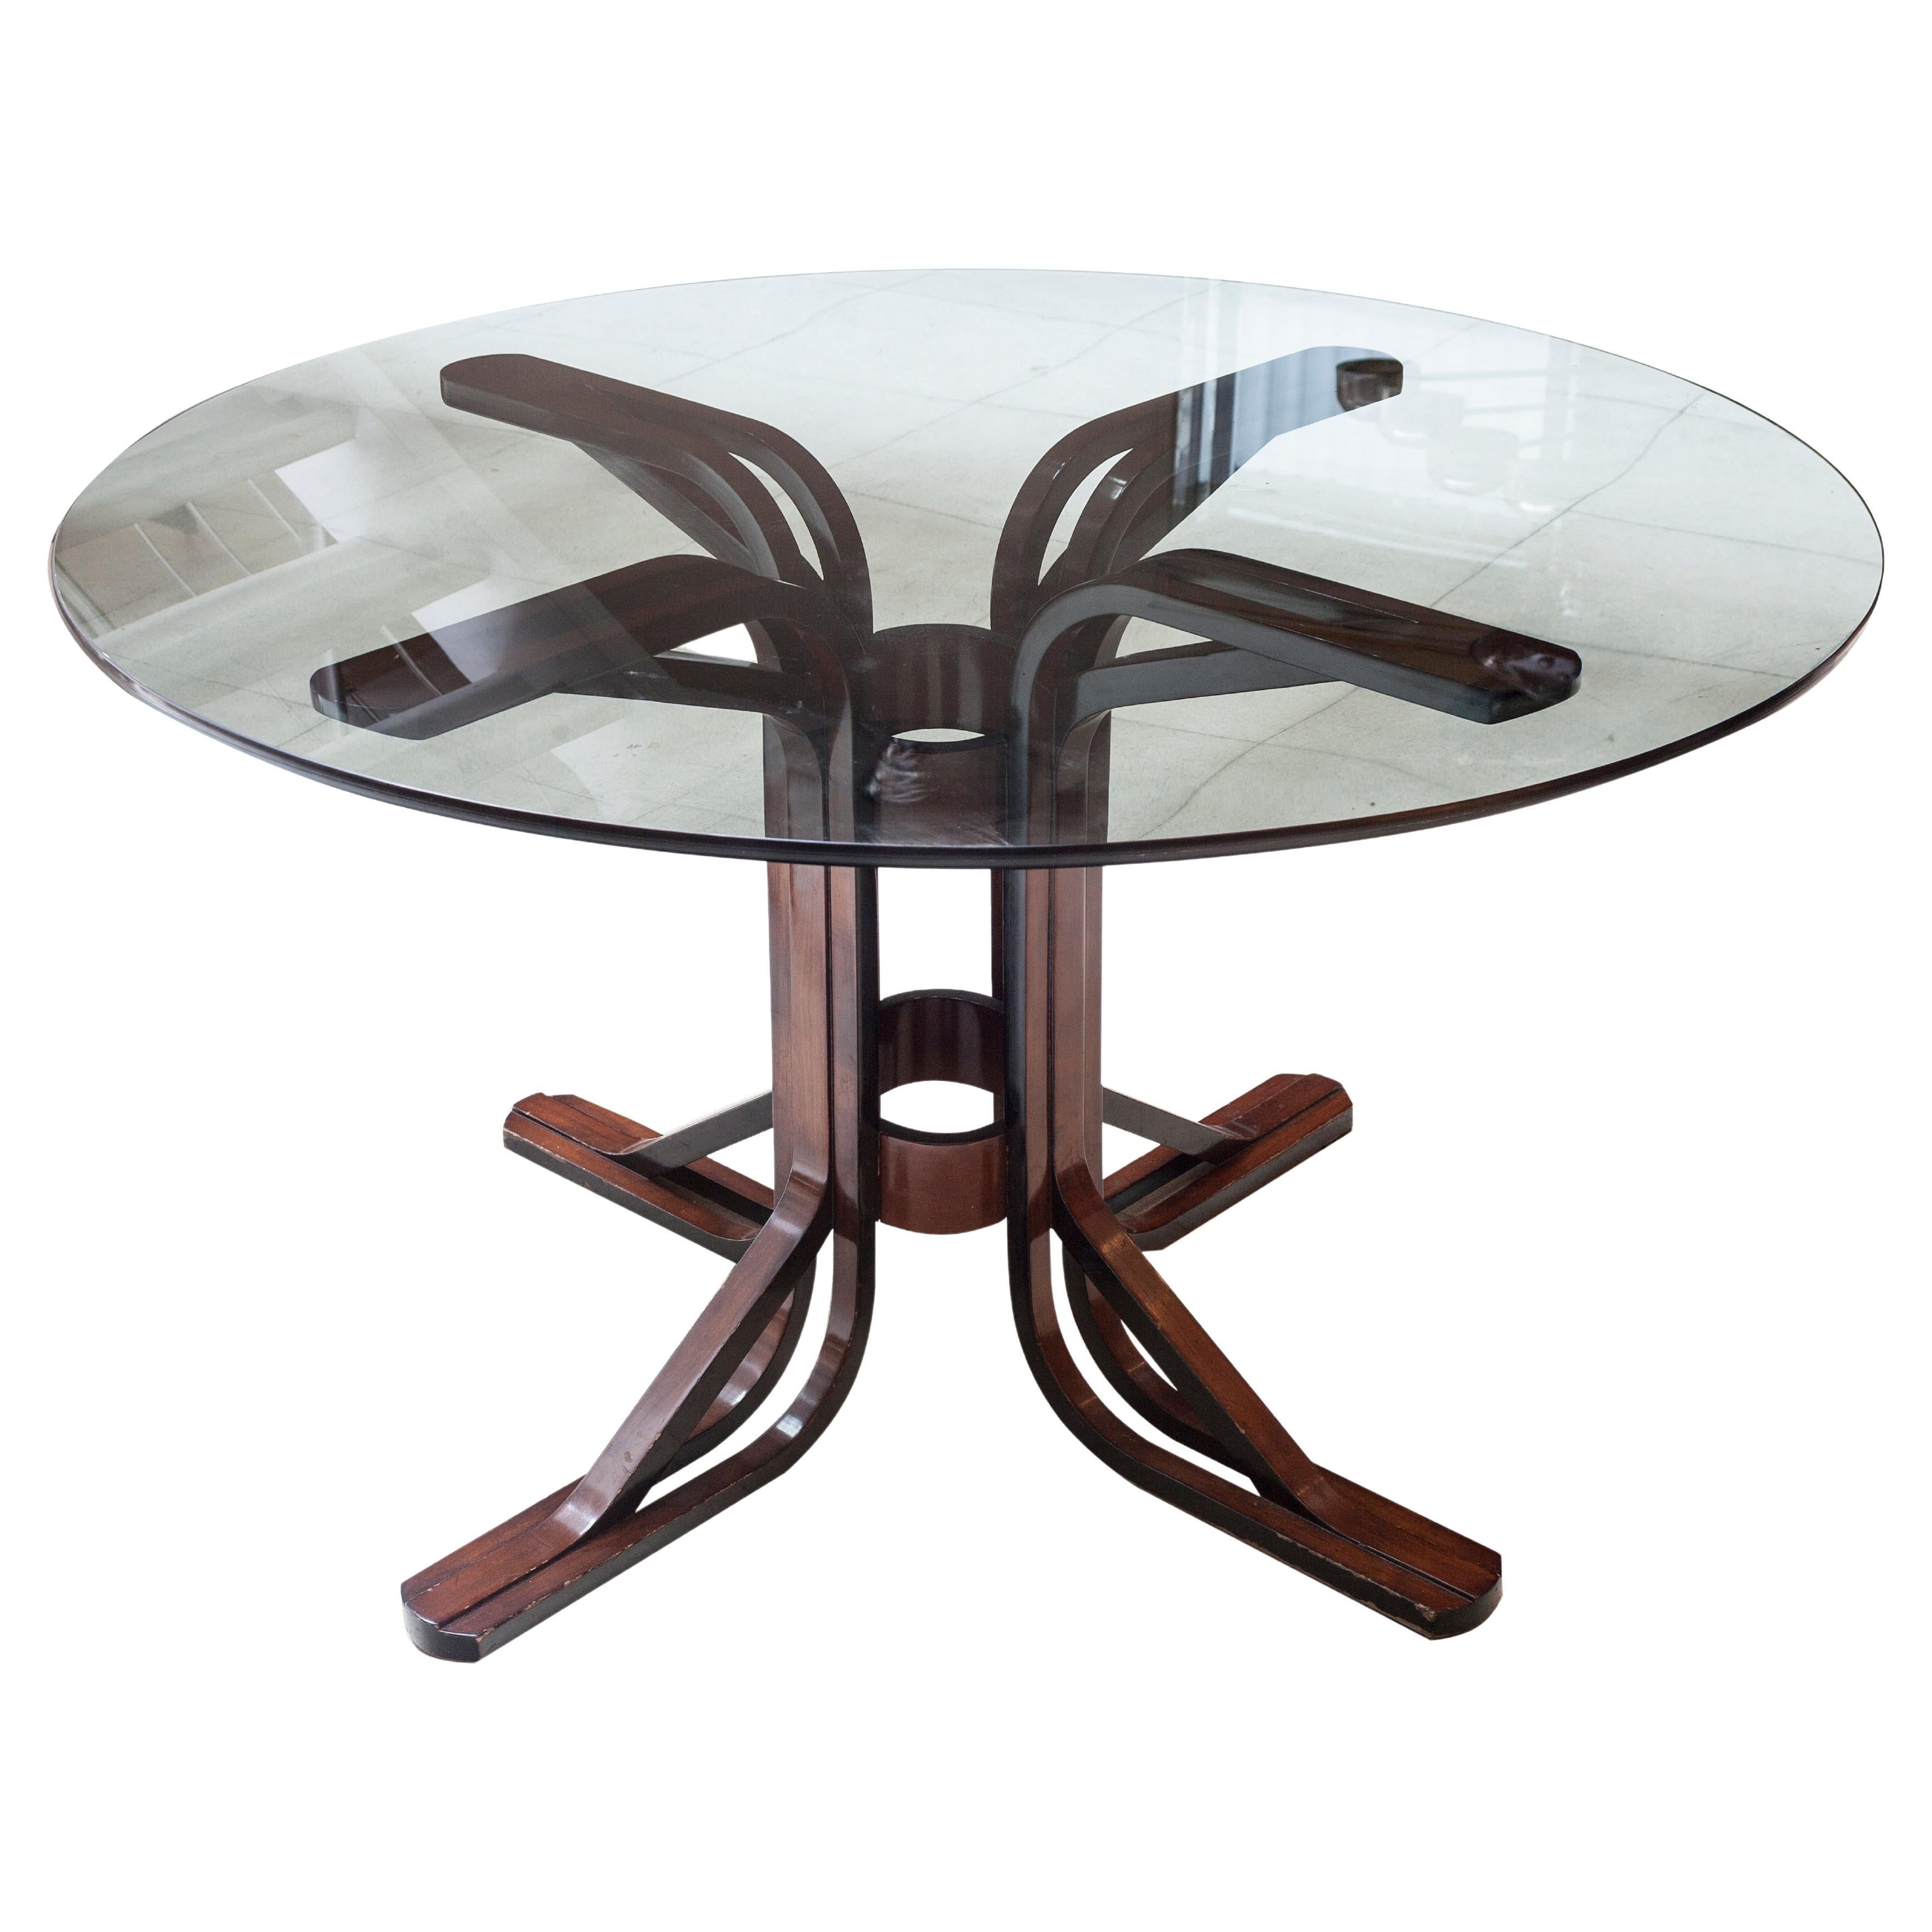 Table, Style: Art Deco, ' 4 People', Year: 1920, France